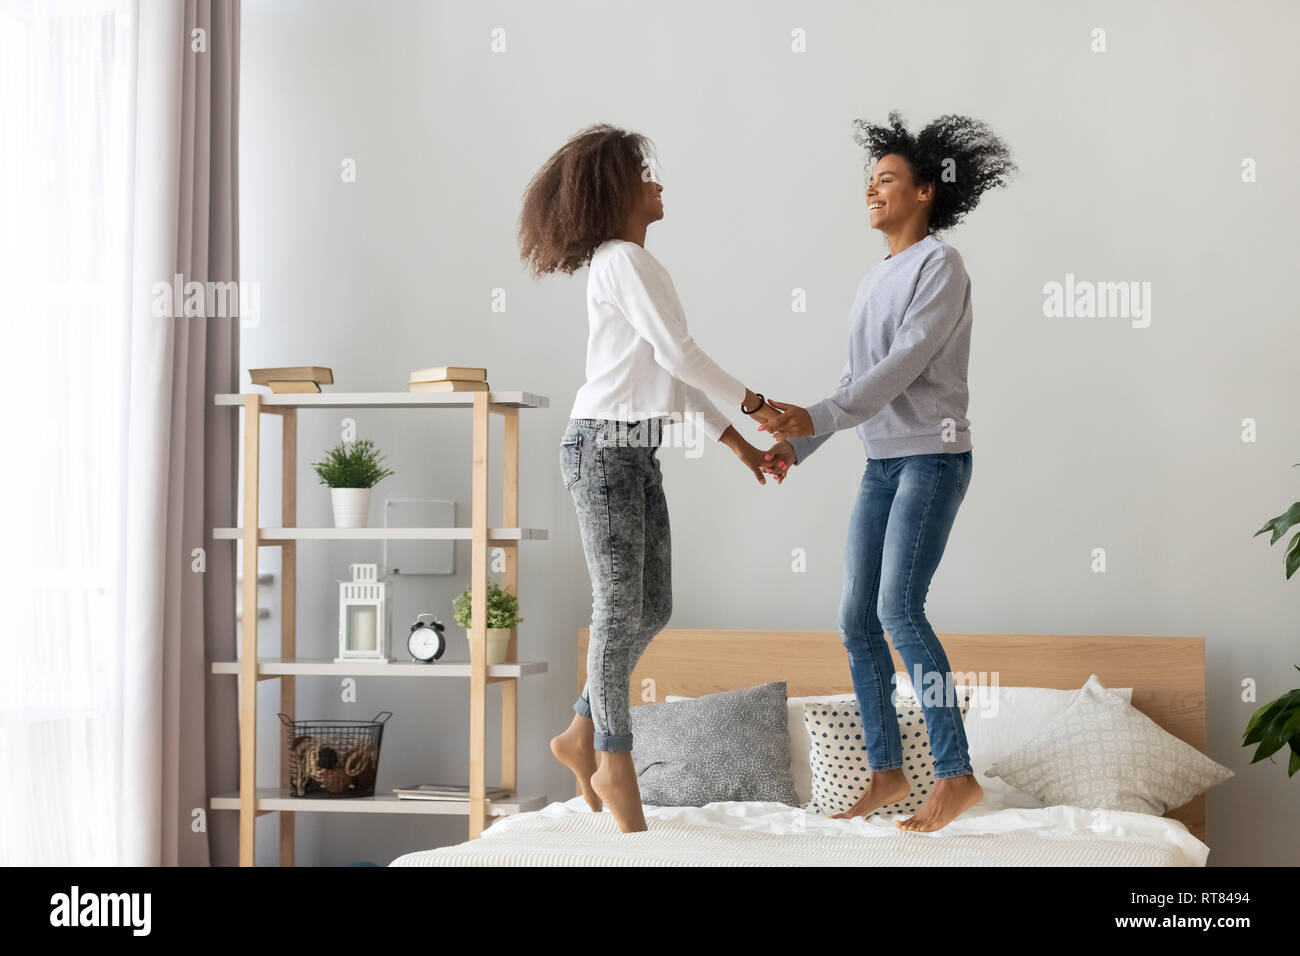 Black mother and adolescent daughter holding hands jumping on bed Stock Photo